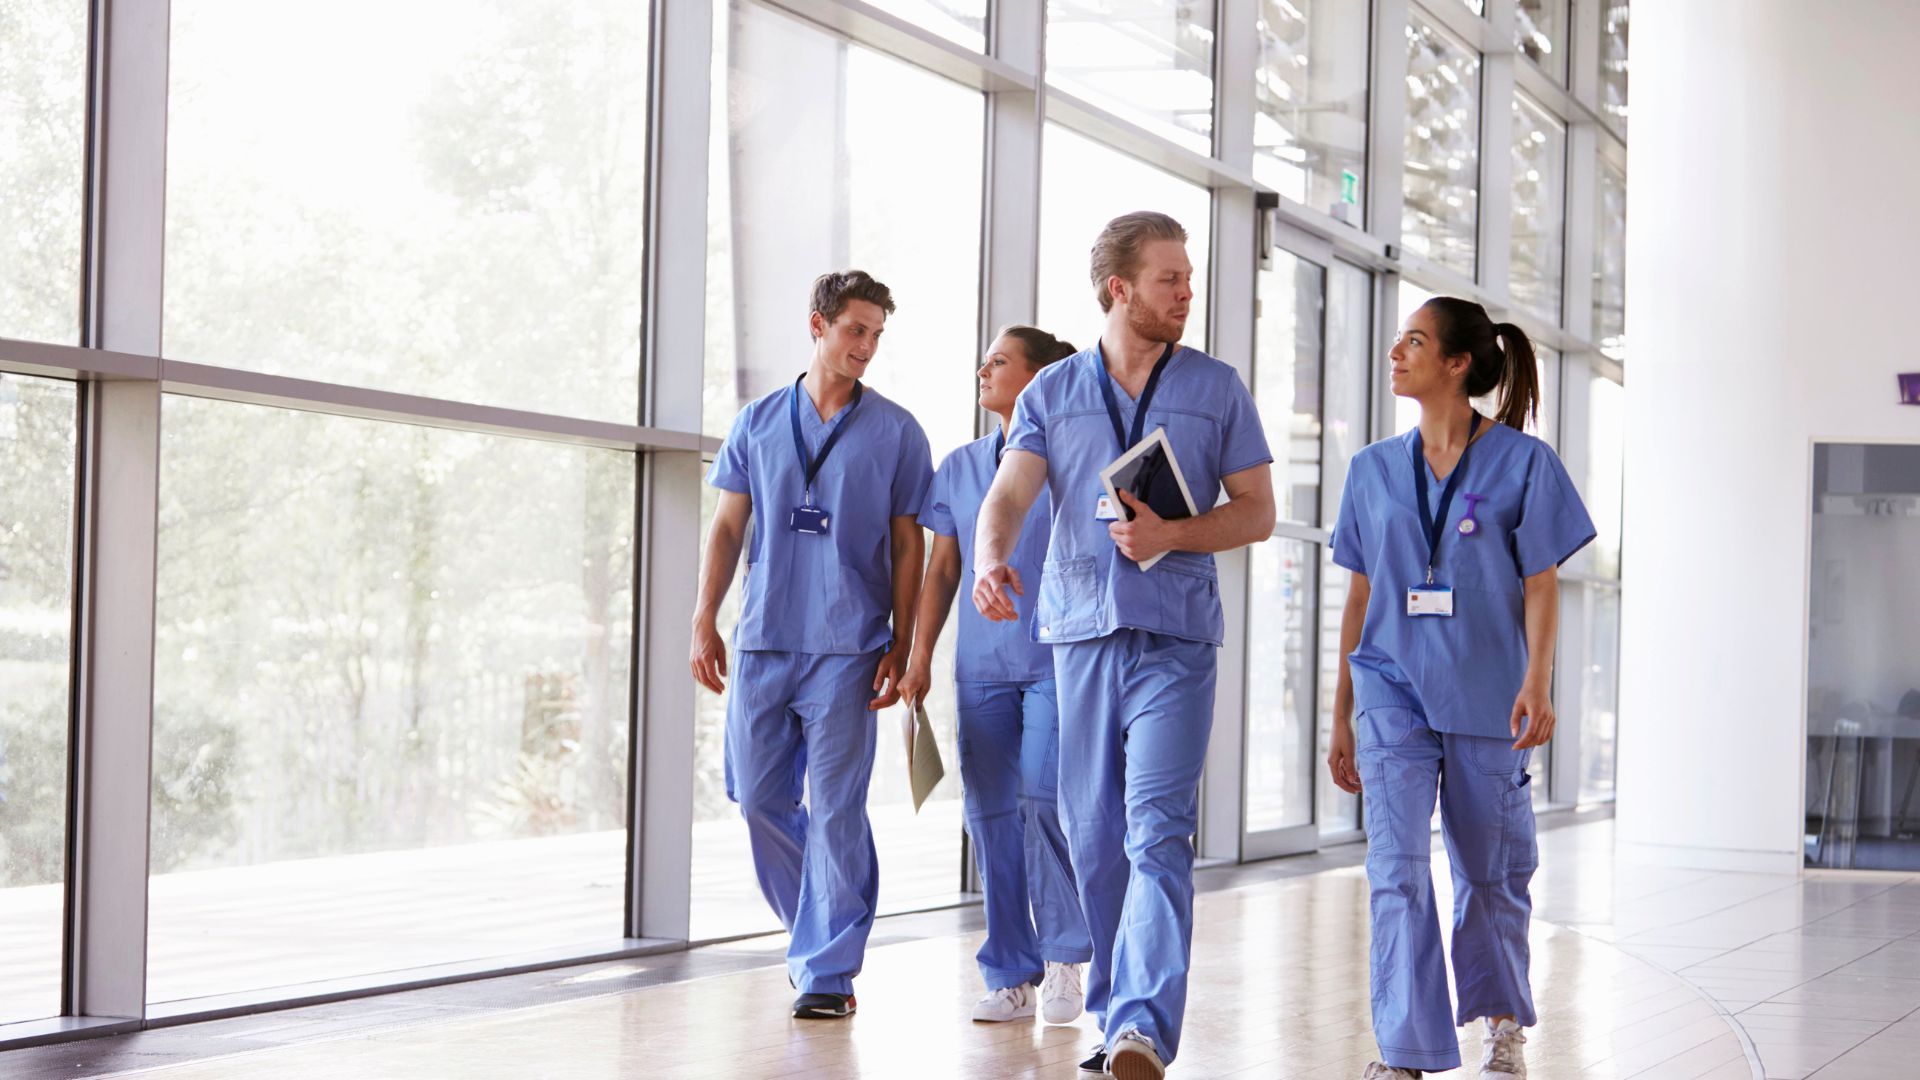 Addressing Staffing Challenges in Rural Healthcare Facilities